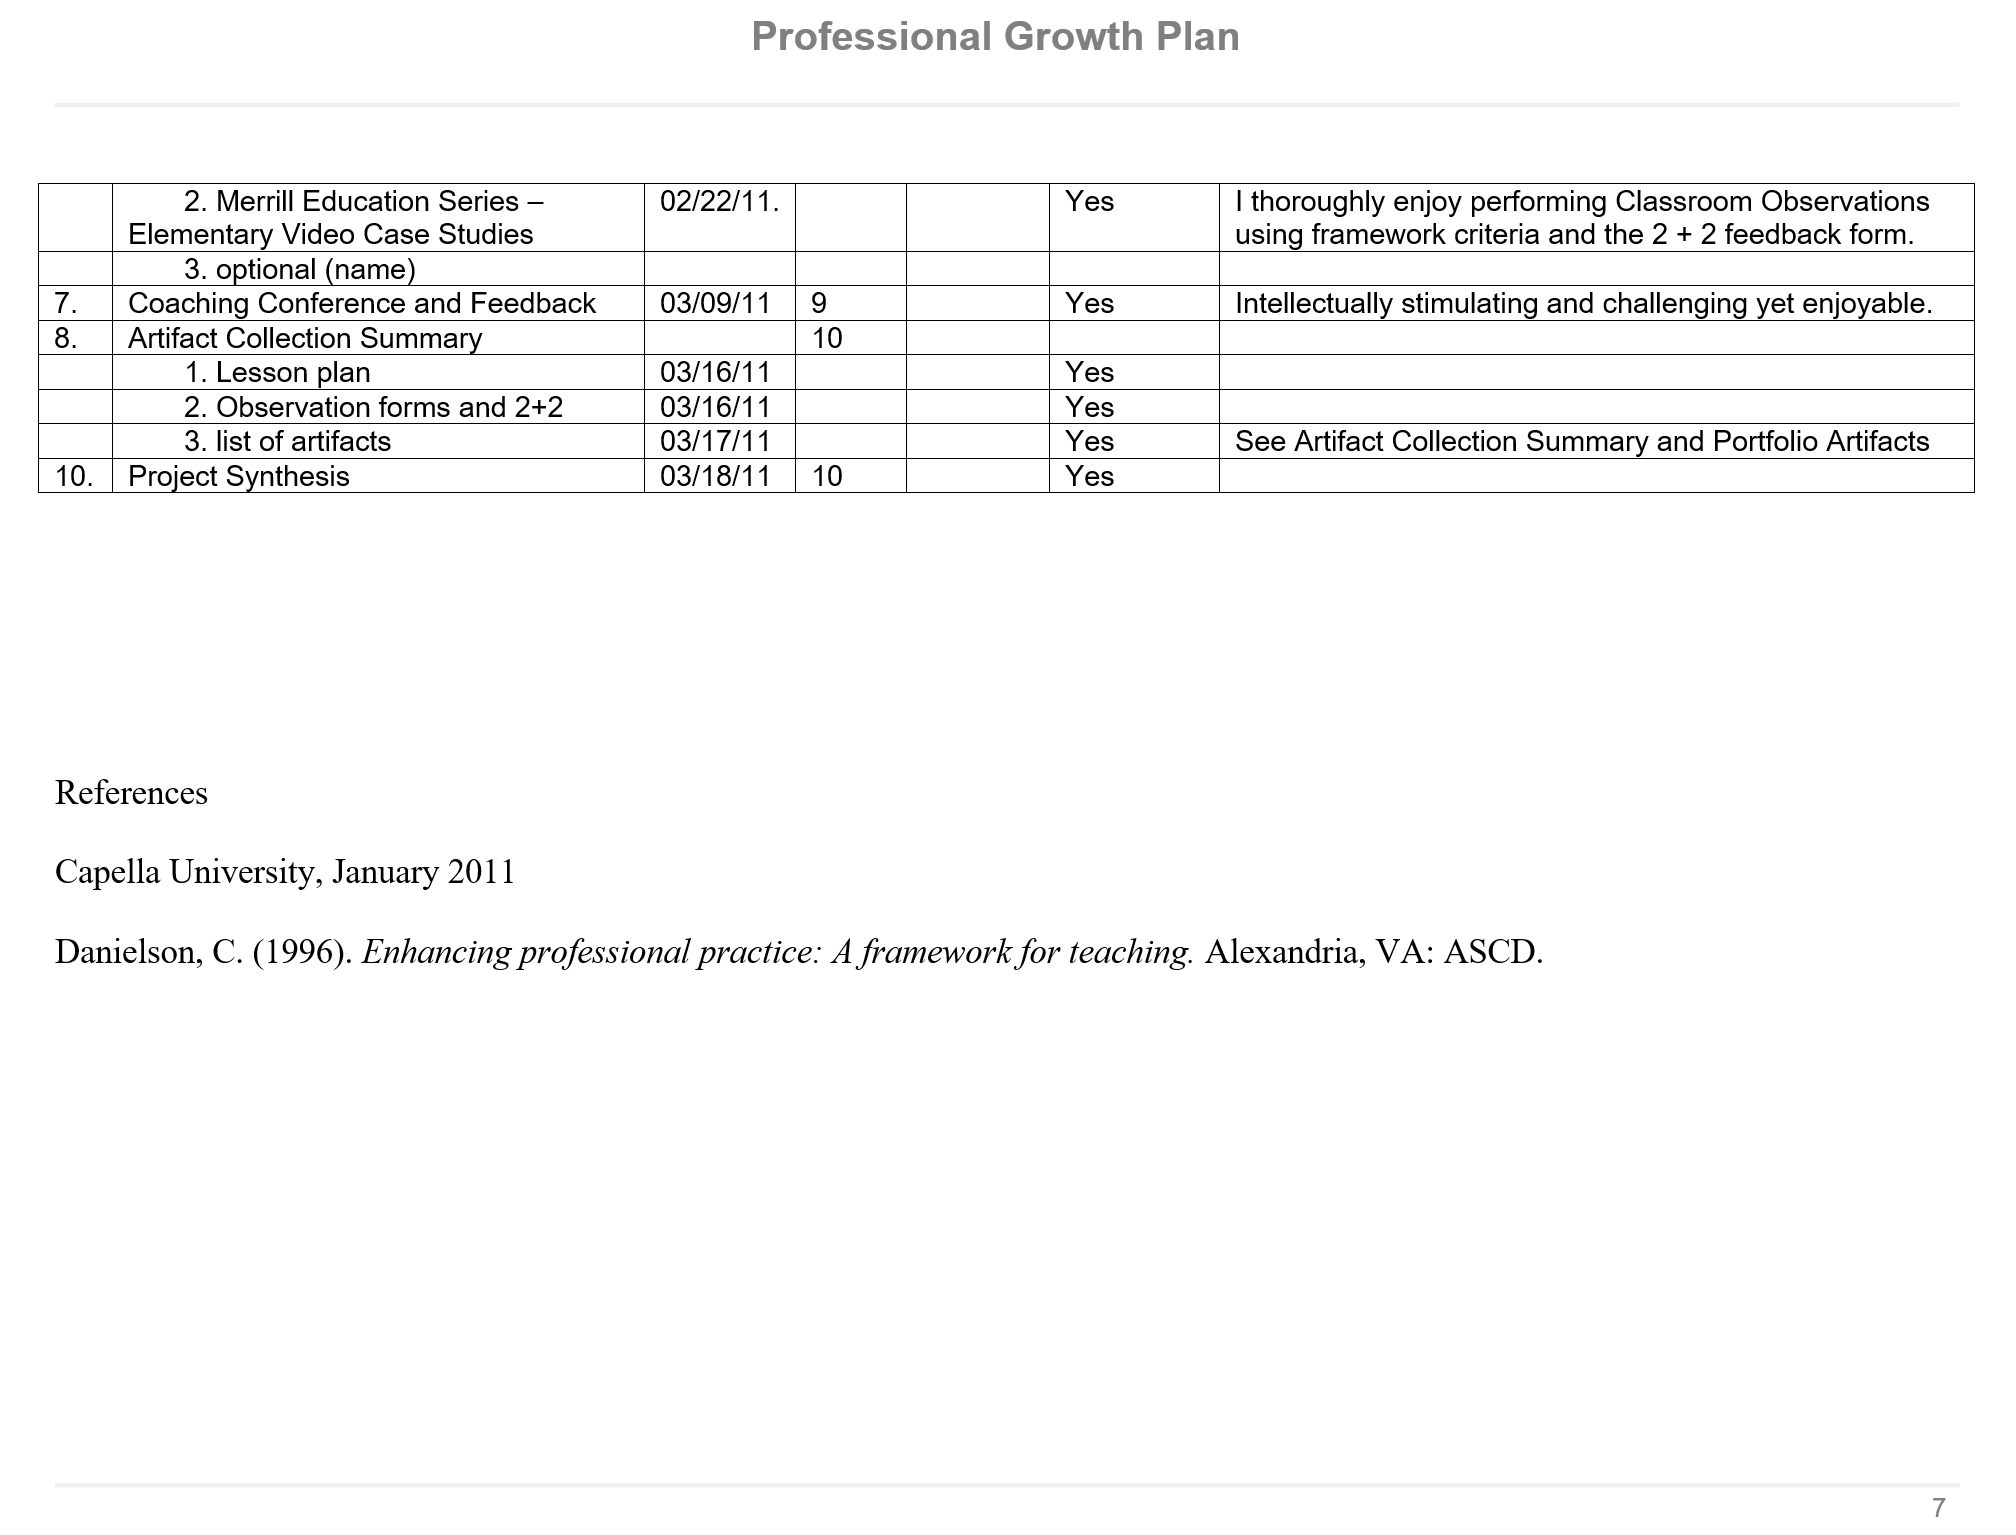 professional growth plan p 7 of 7.PNG